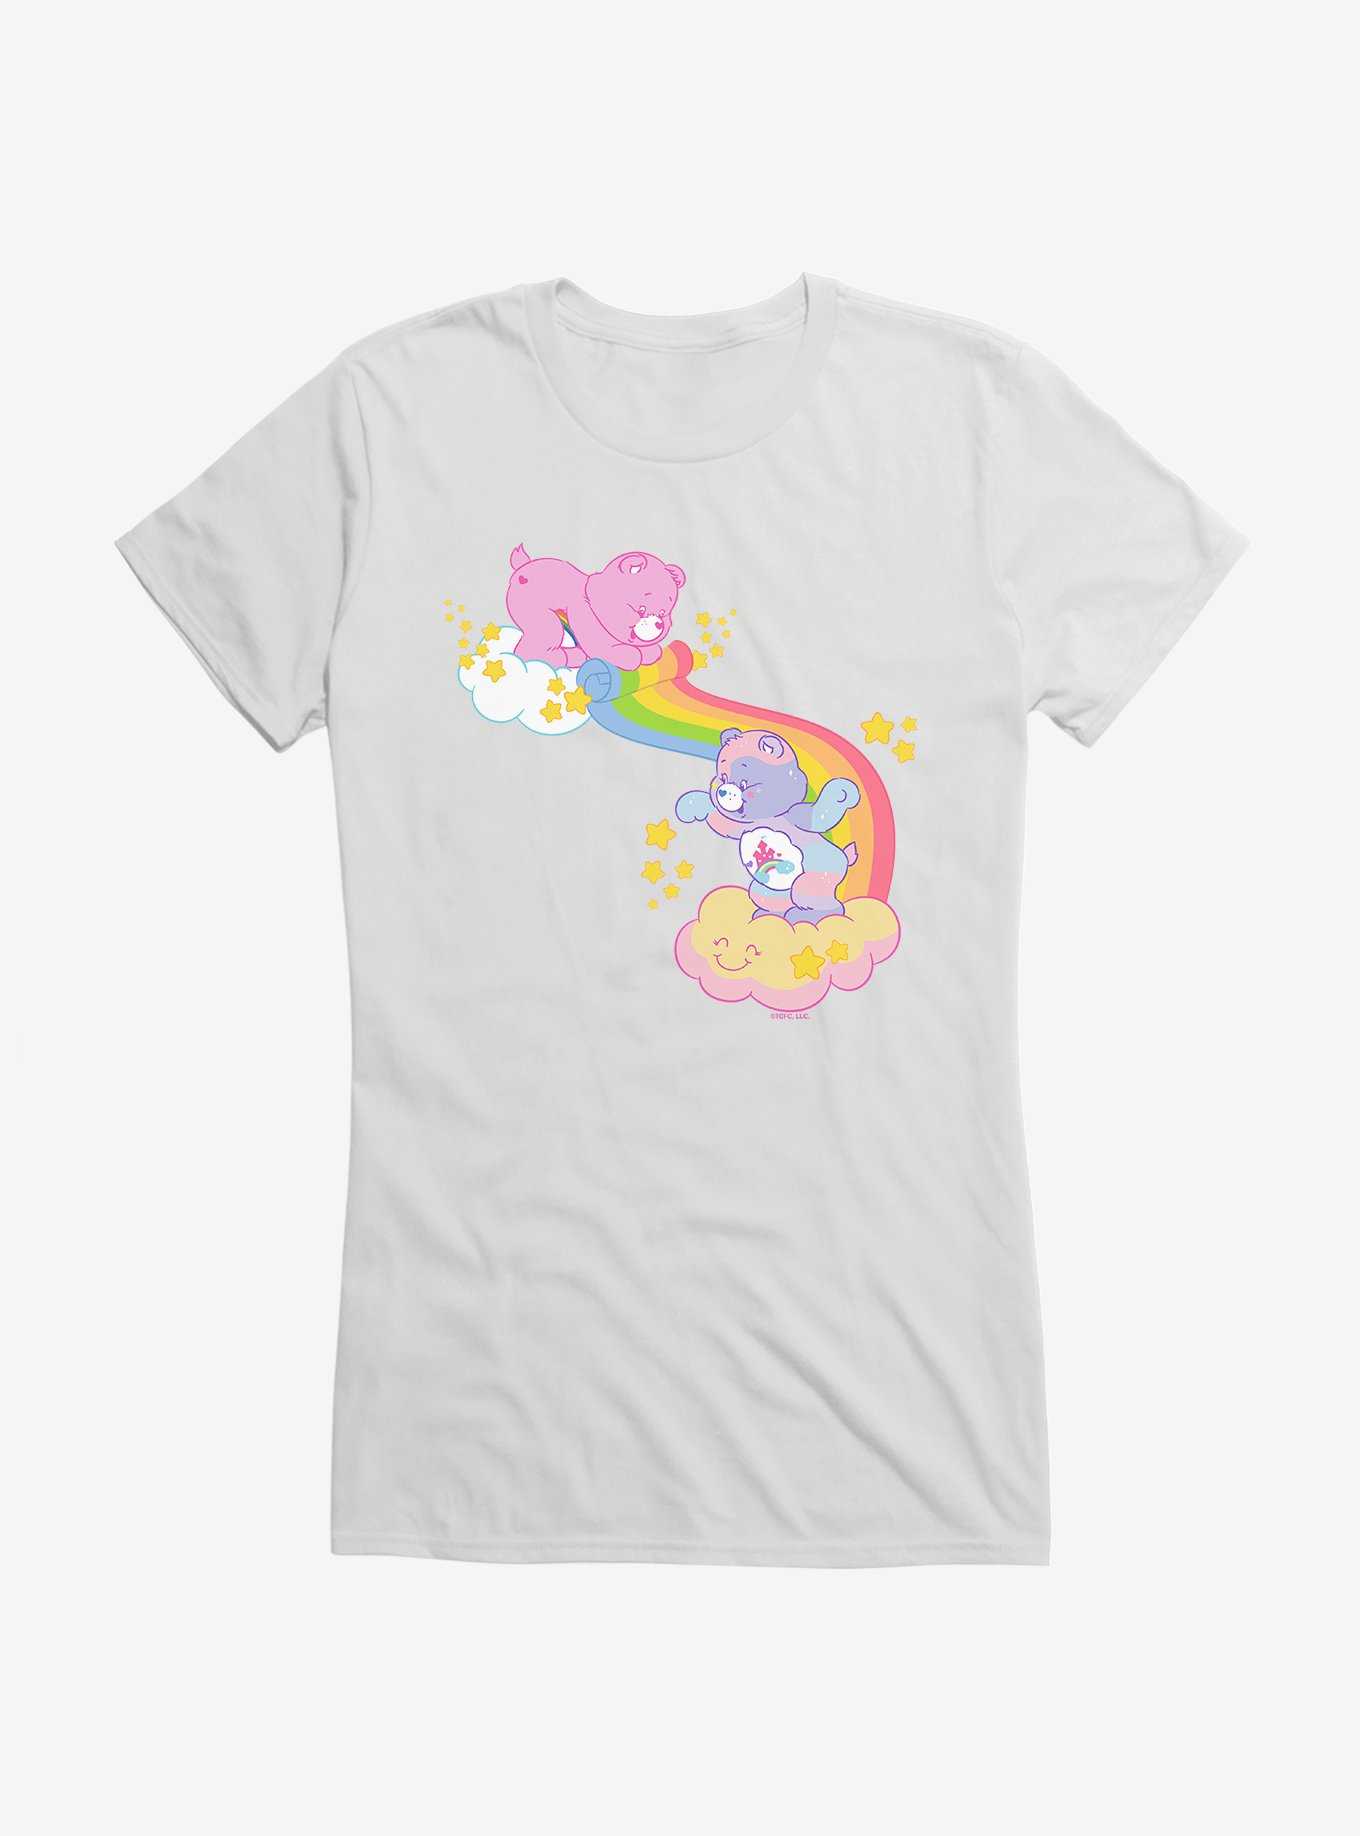 Care Bears In The Clouds Girls T-Shirt, , hi-res